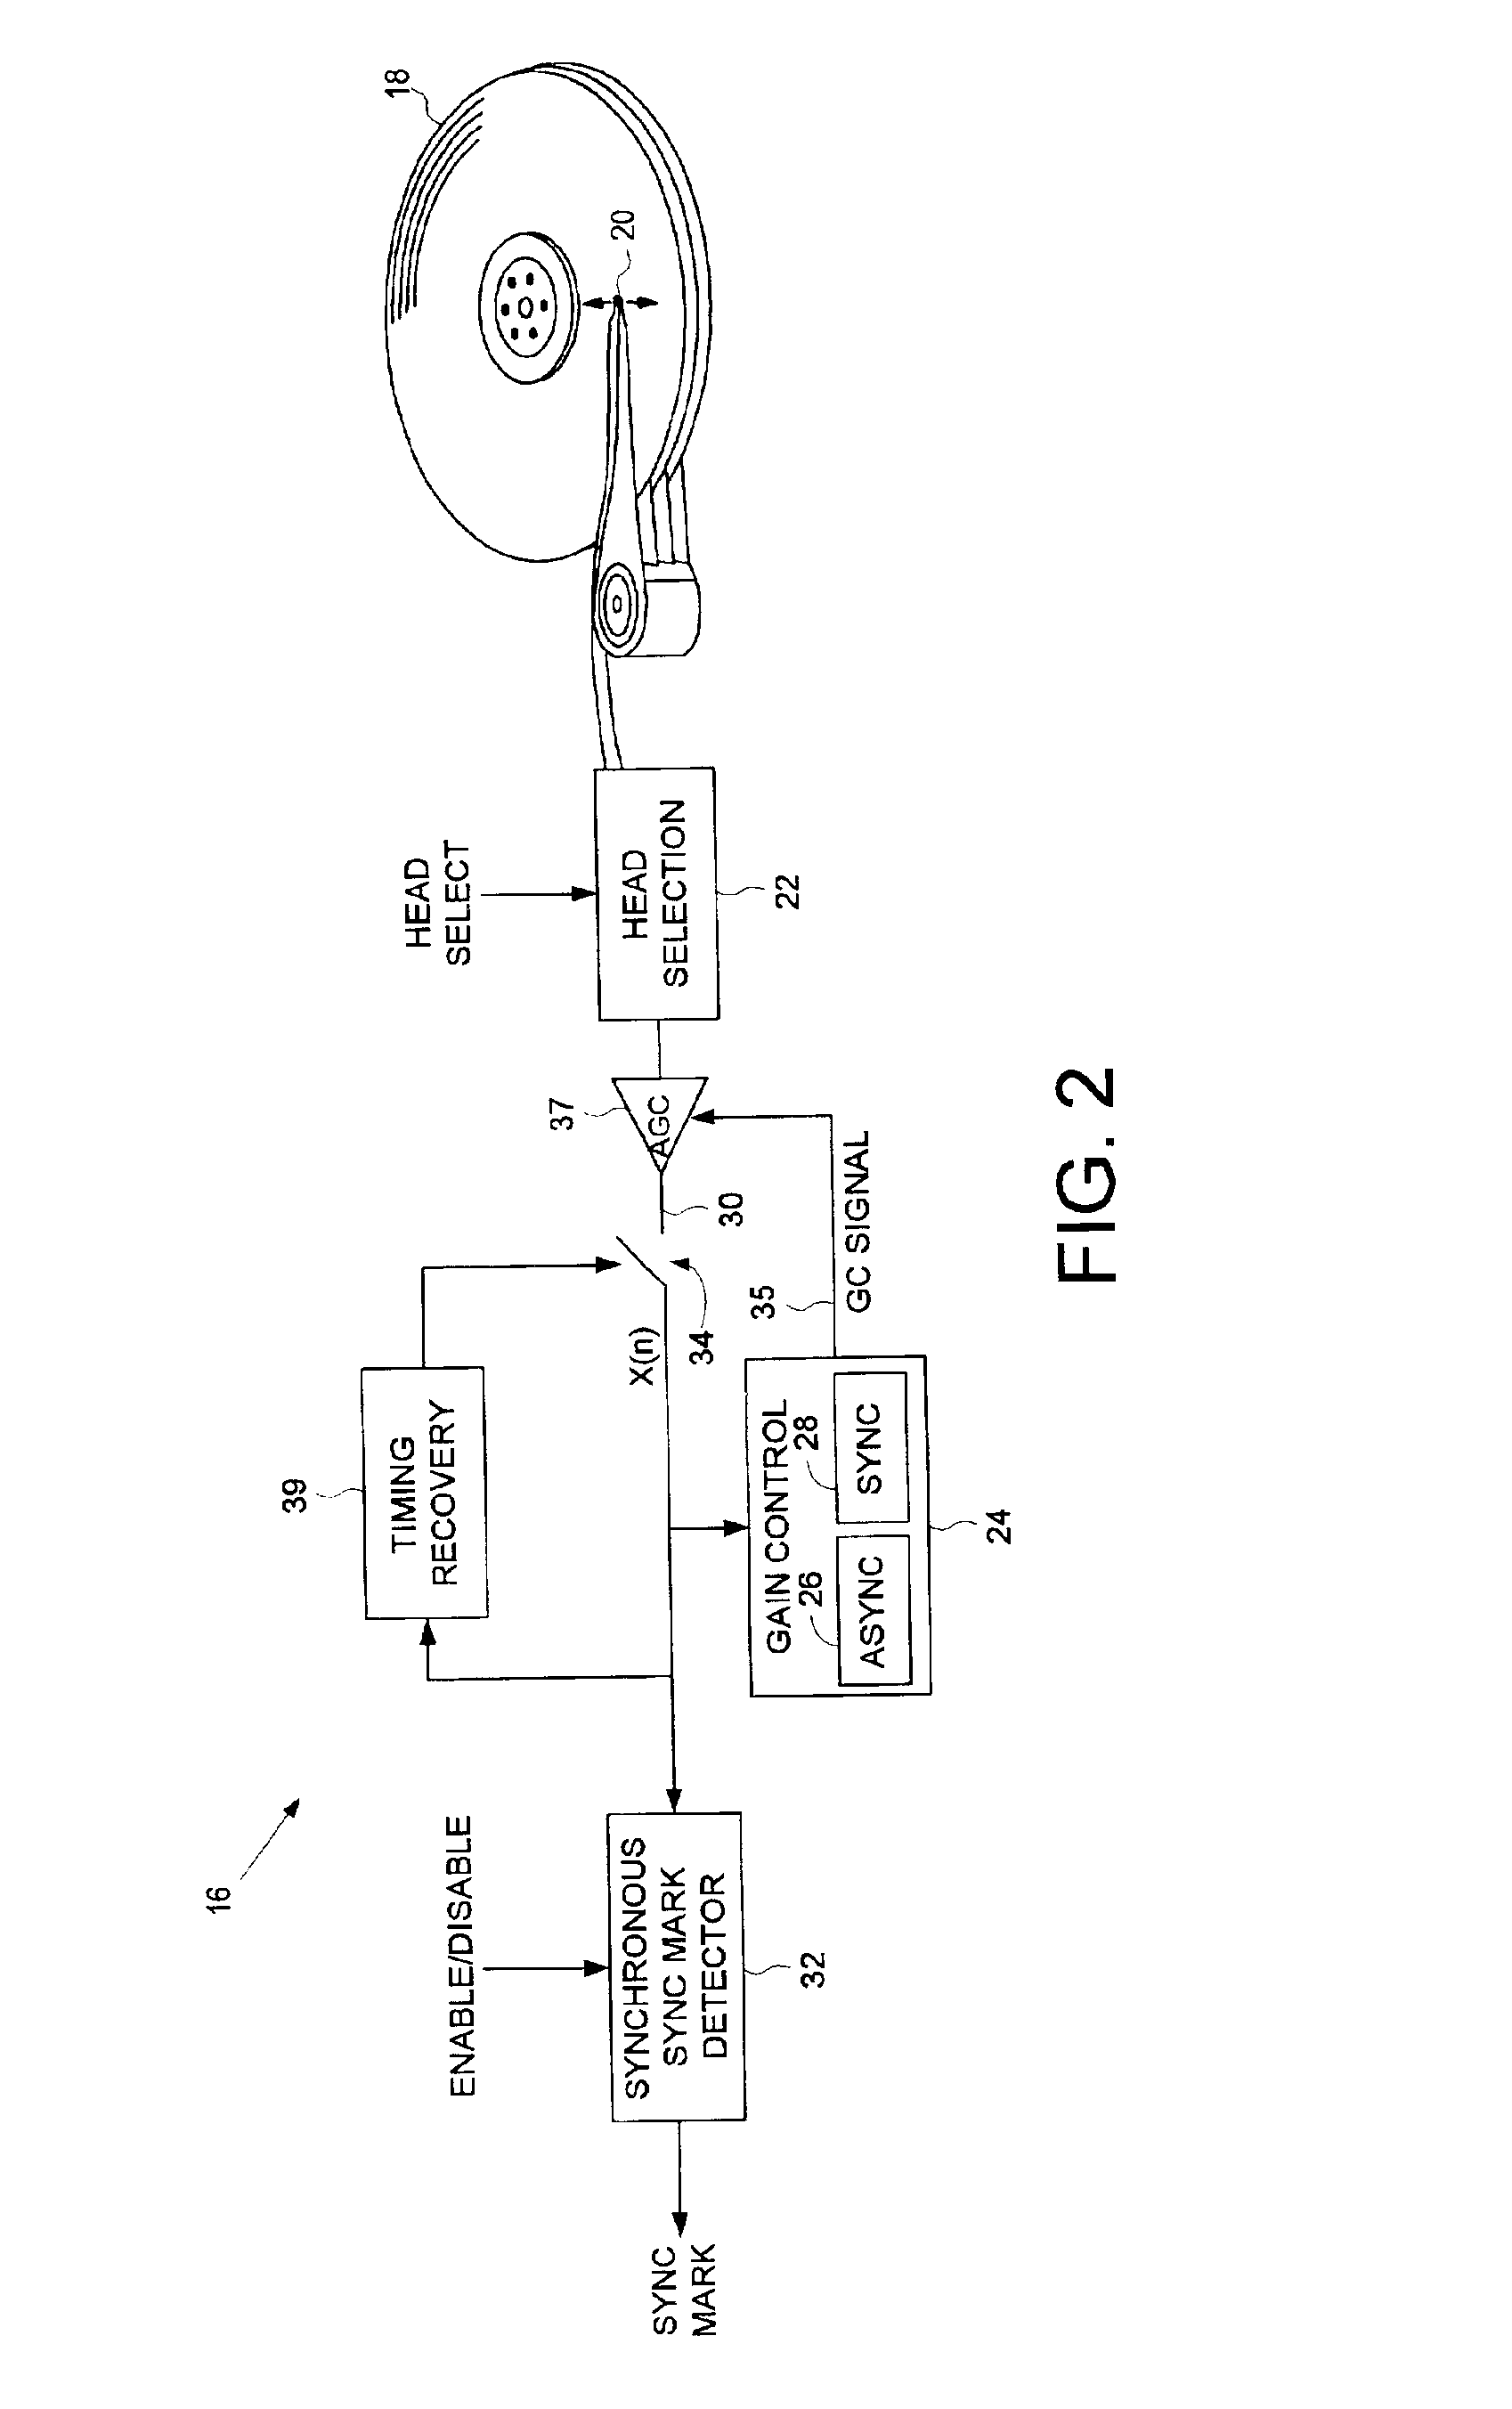 Disk drive comprising asynchronous/synchronous gain control for fault tolerant detection of servo sync mark after head switch